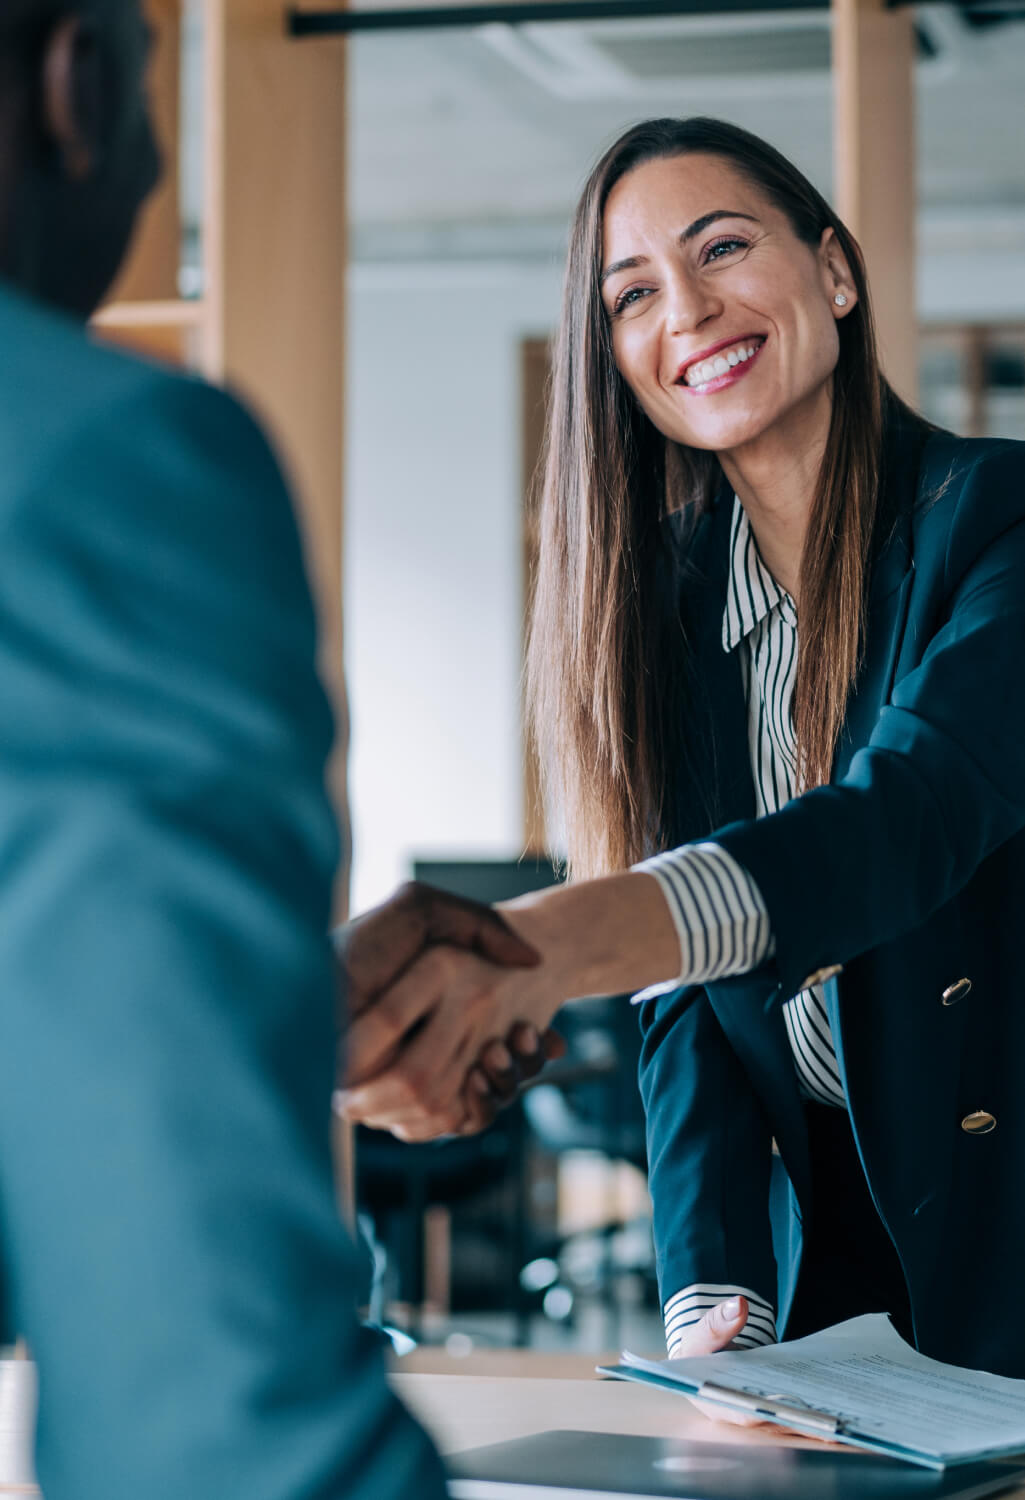 Woman shaking hands with a client at work